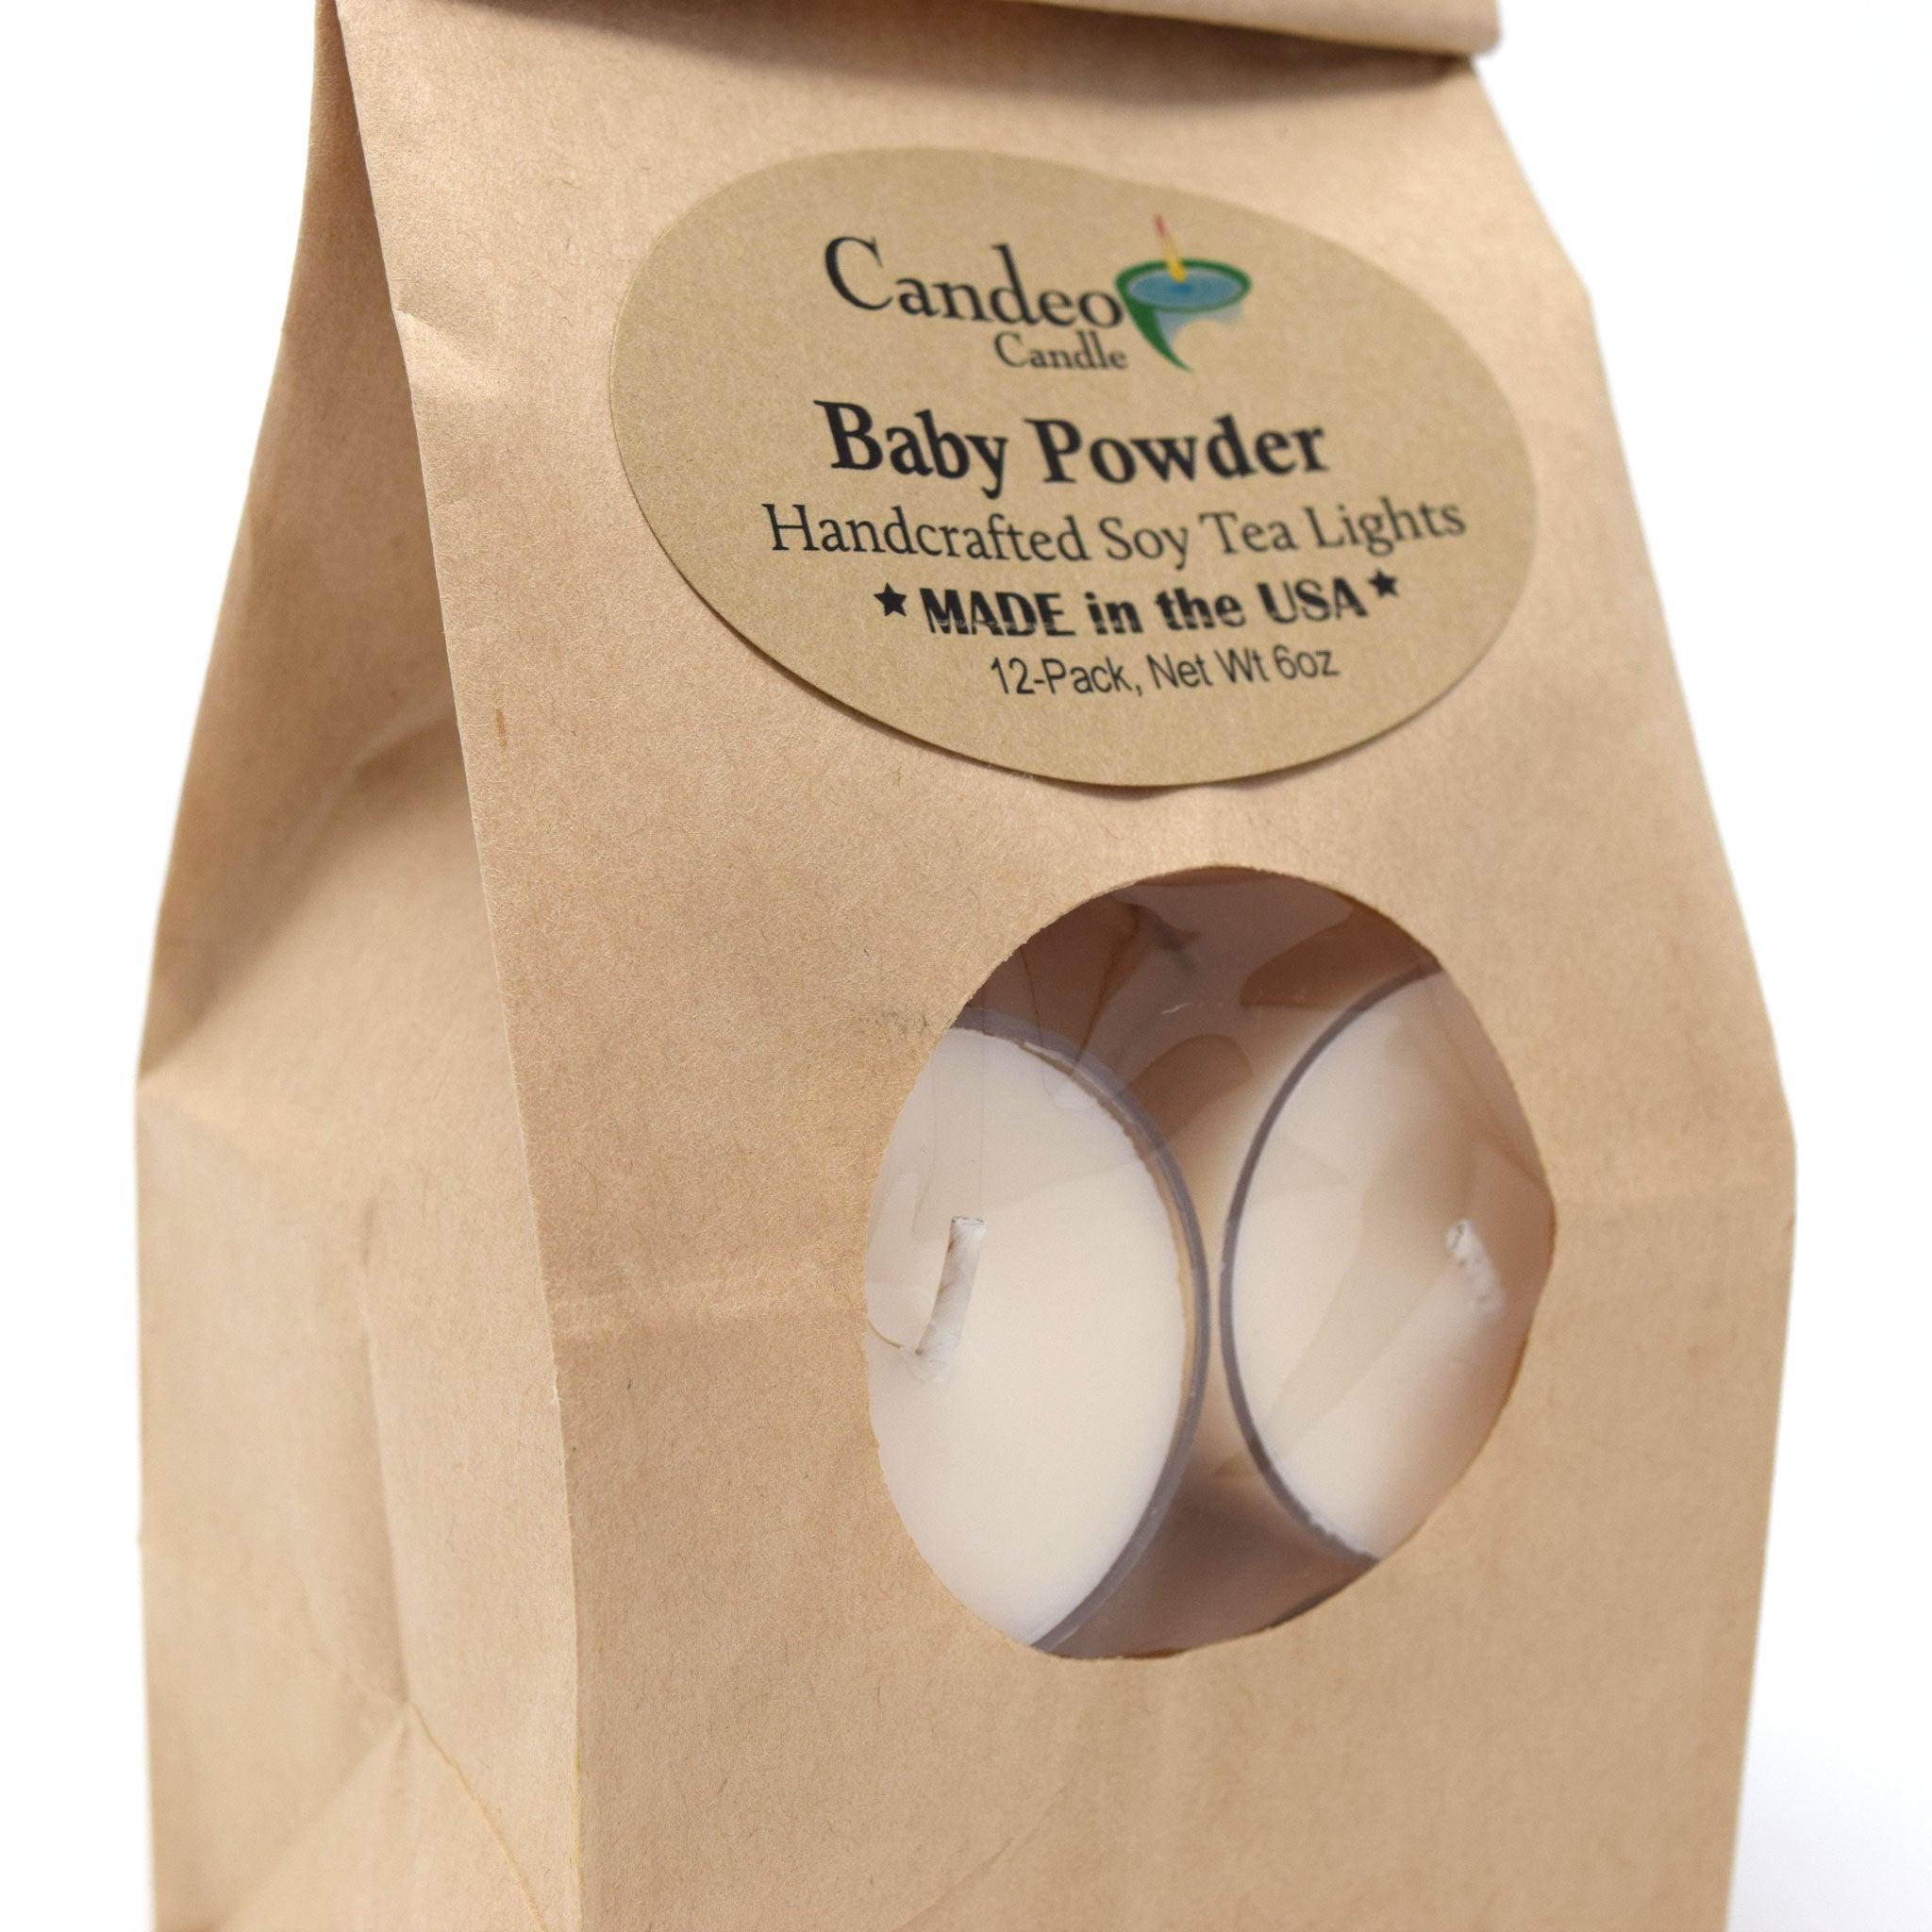 Baby Powder, Soy Tea Light 12-Pack - Candeo Candle